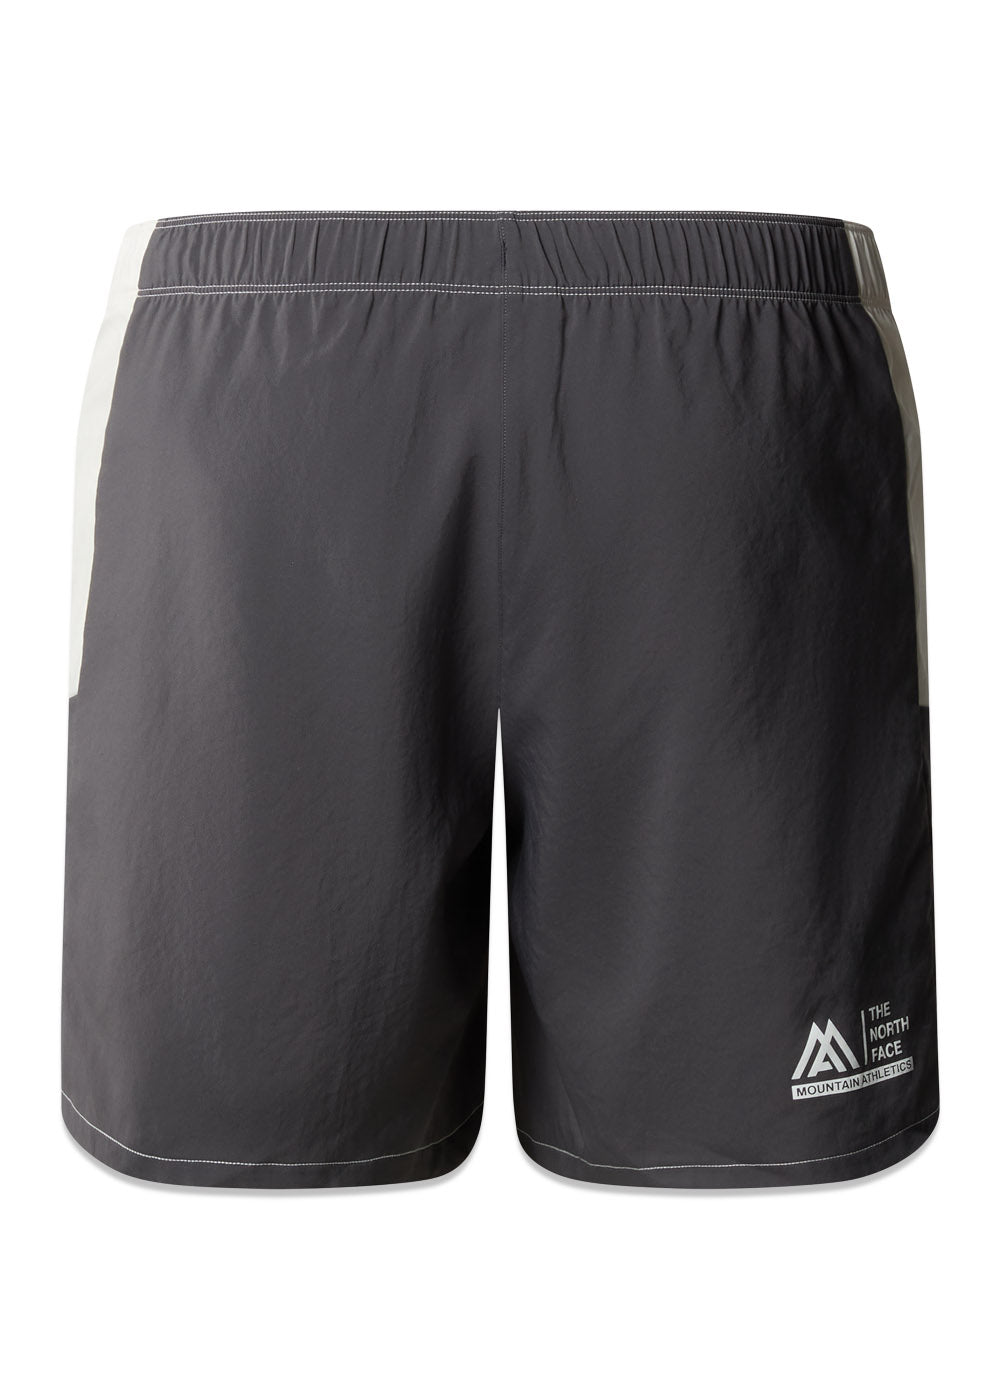 MA woven shorts - White Dune / Anthracite Grey